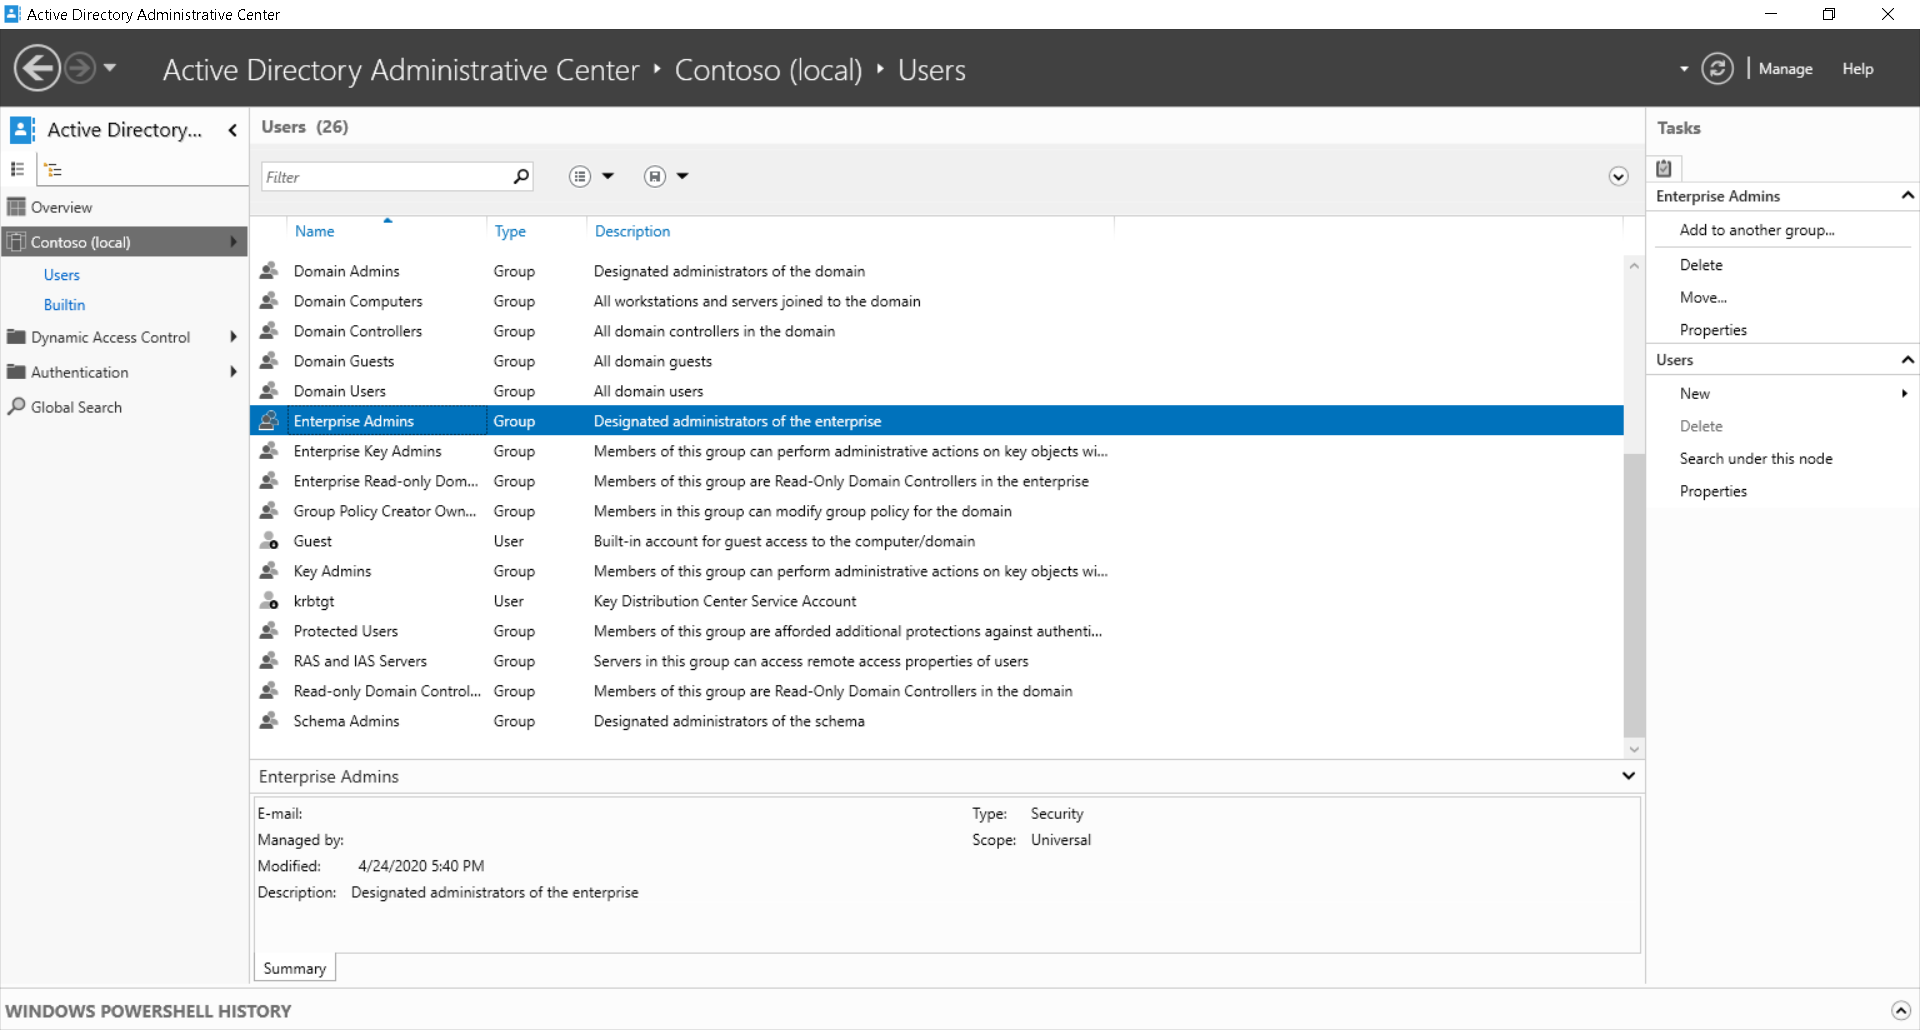 A screenshot of the Active Directory Administrative Center. The administrator has selected the Enterprise Admins group in Contoso (local)\Users. Also displayed are other groups in the Users folder.